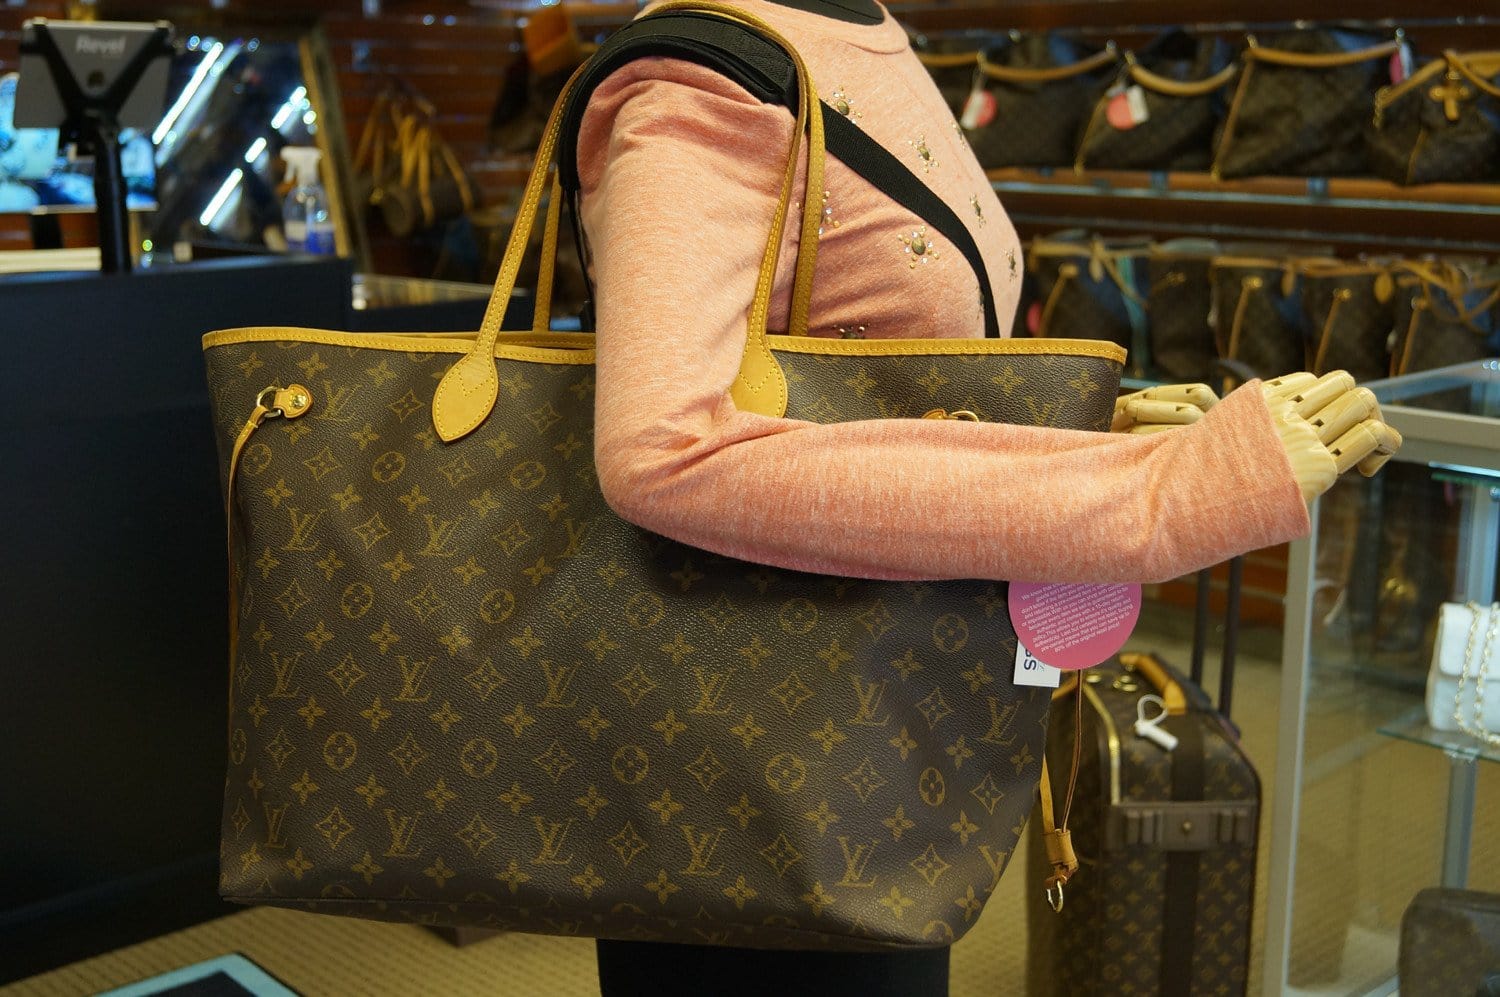 Louis Vuitton Neverfull Bag, Authenticity Guaranteed